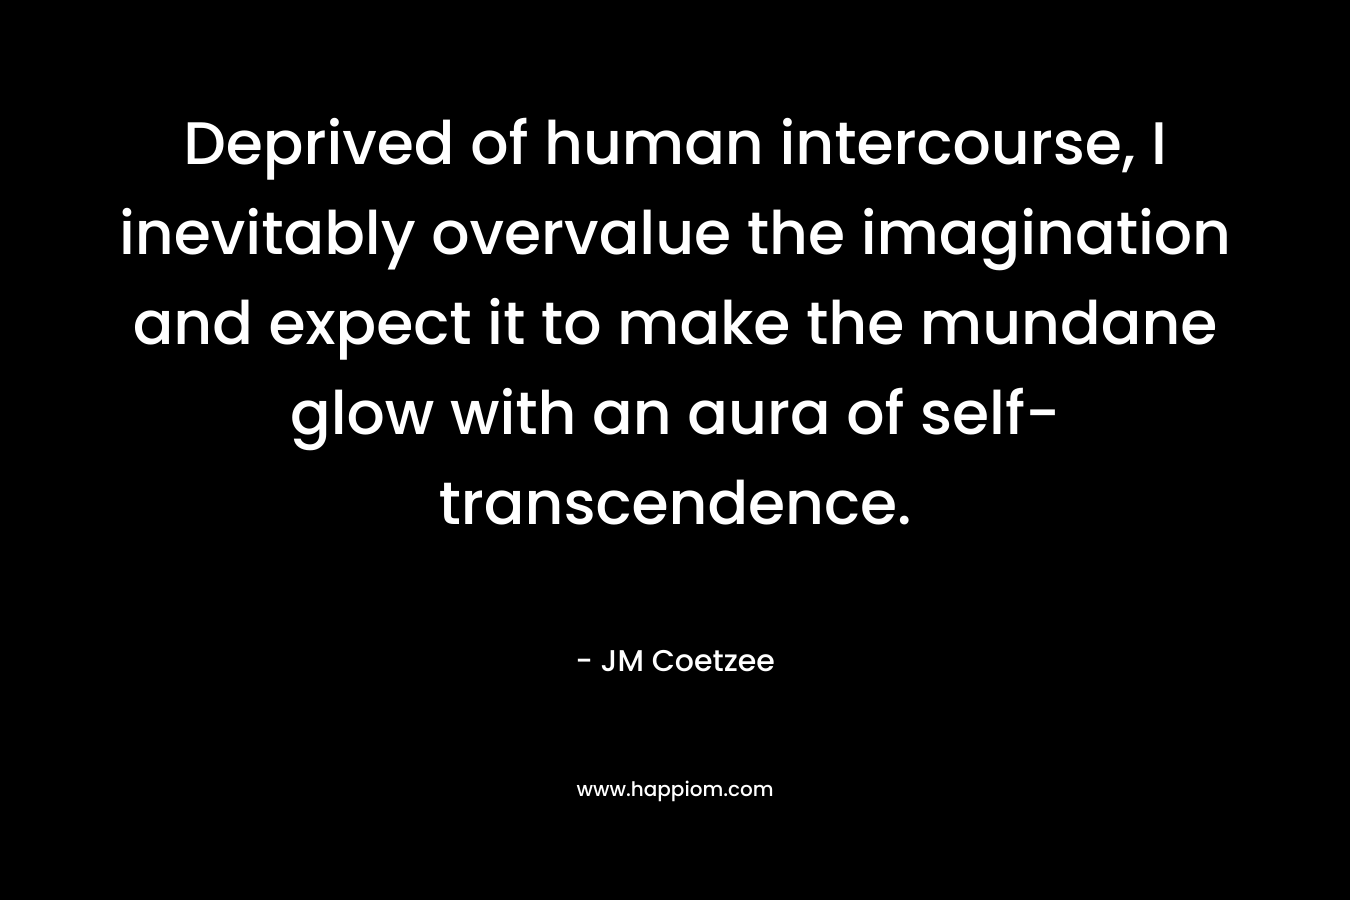 Deprived of human intercourse, I inevitably overvalue the imagination and expect it to make the mundane glow with an aura of self-transcendence. – JM Coetzee